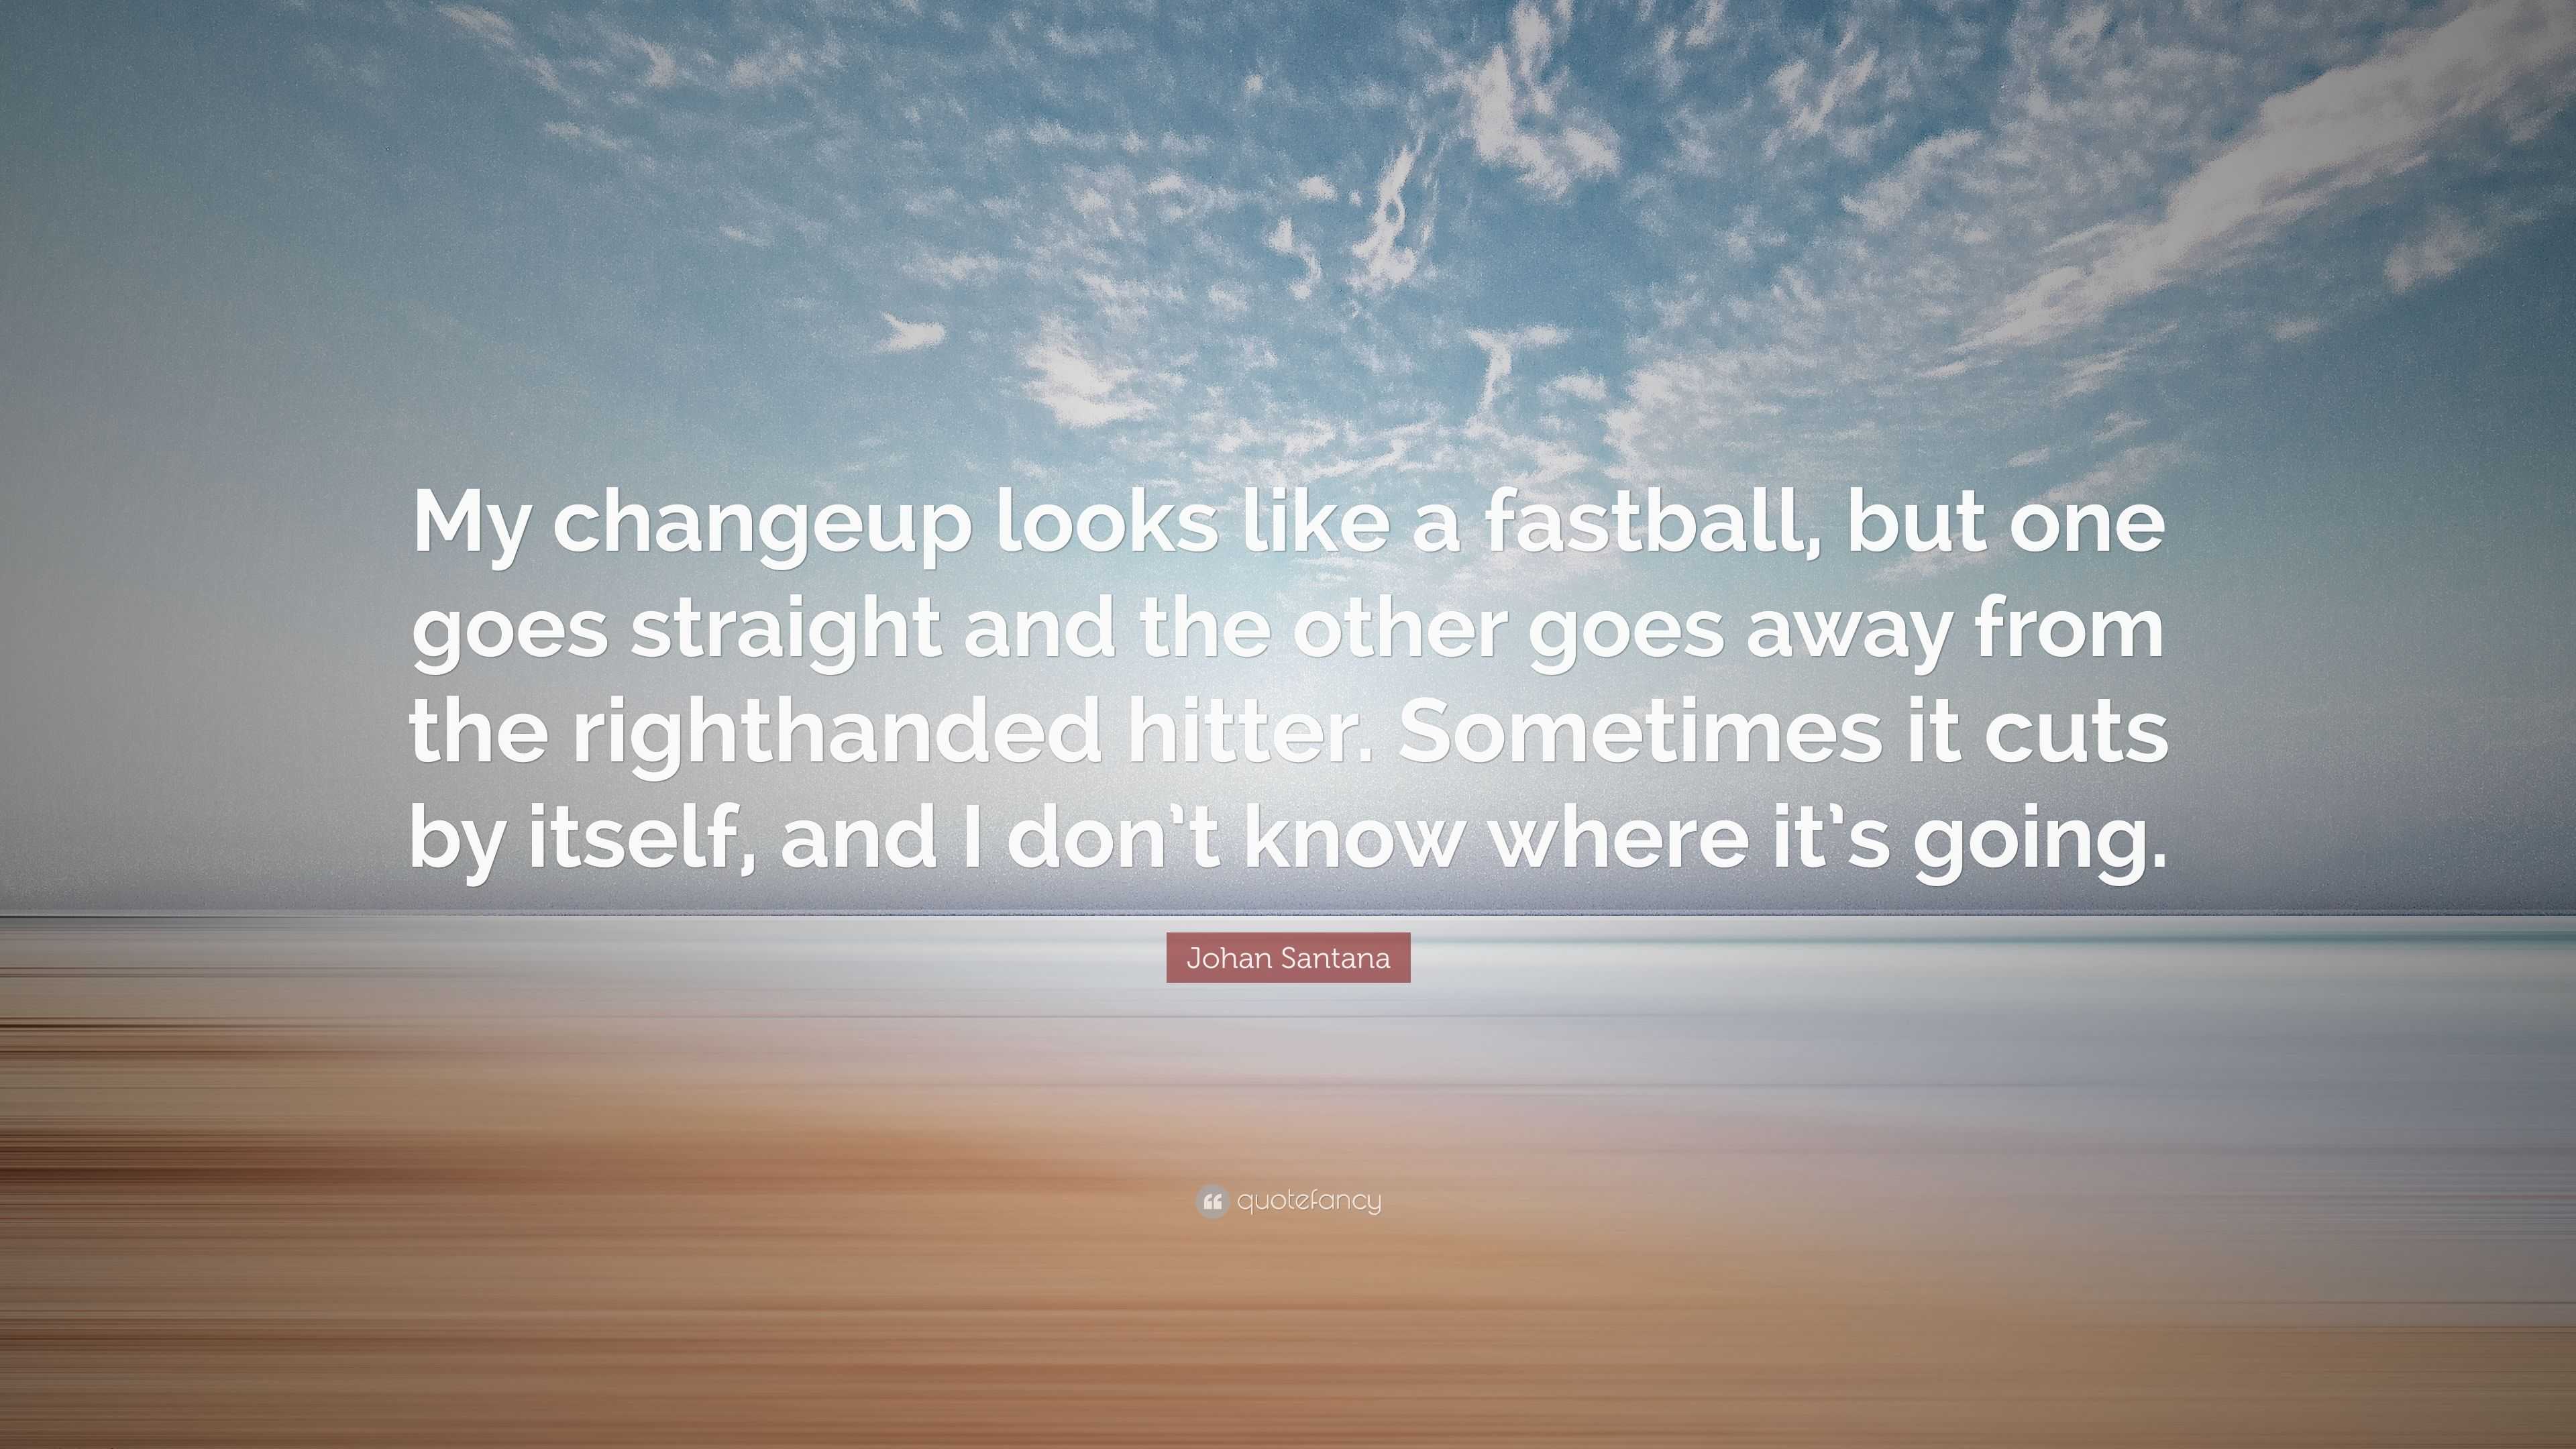 Johan Santana Quote: “My changeup looks like a fastball, but one goes  straight and the other goes away from the righthanded hitter. Sometimes ”